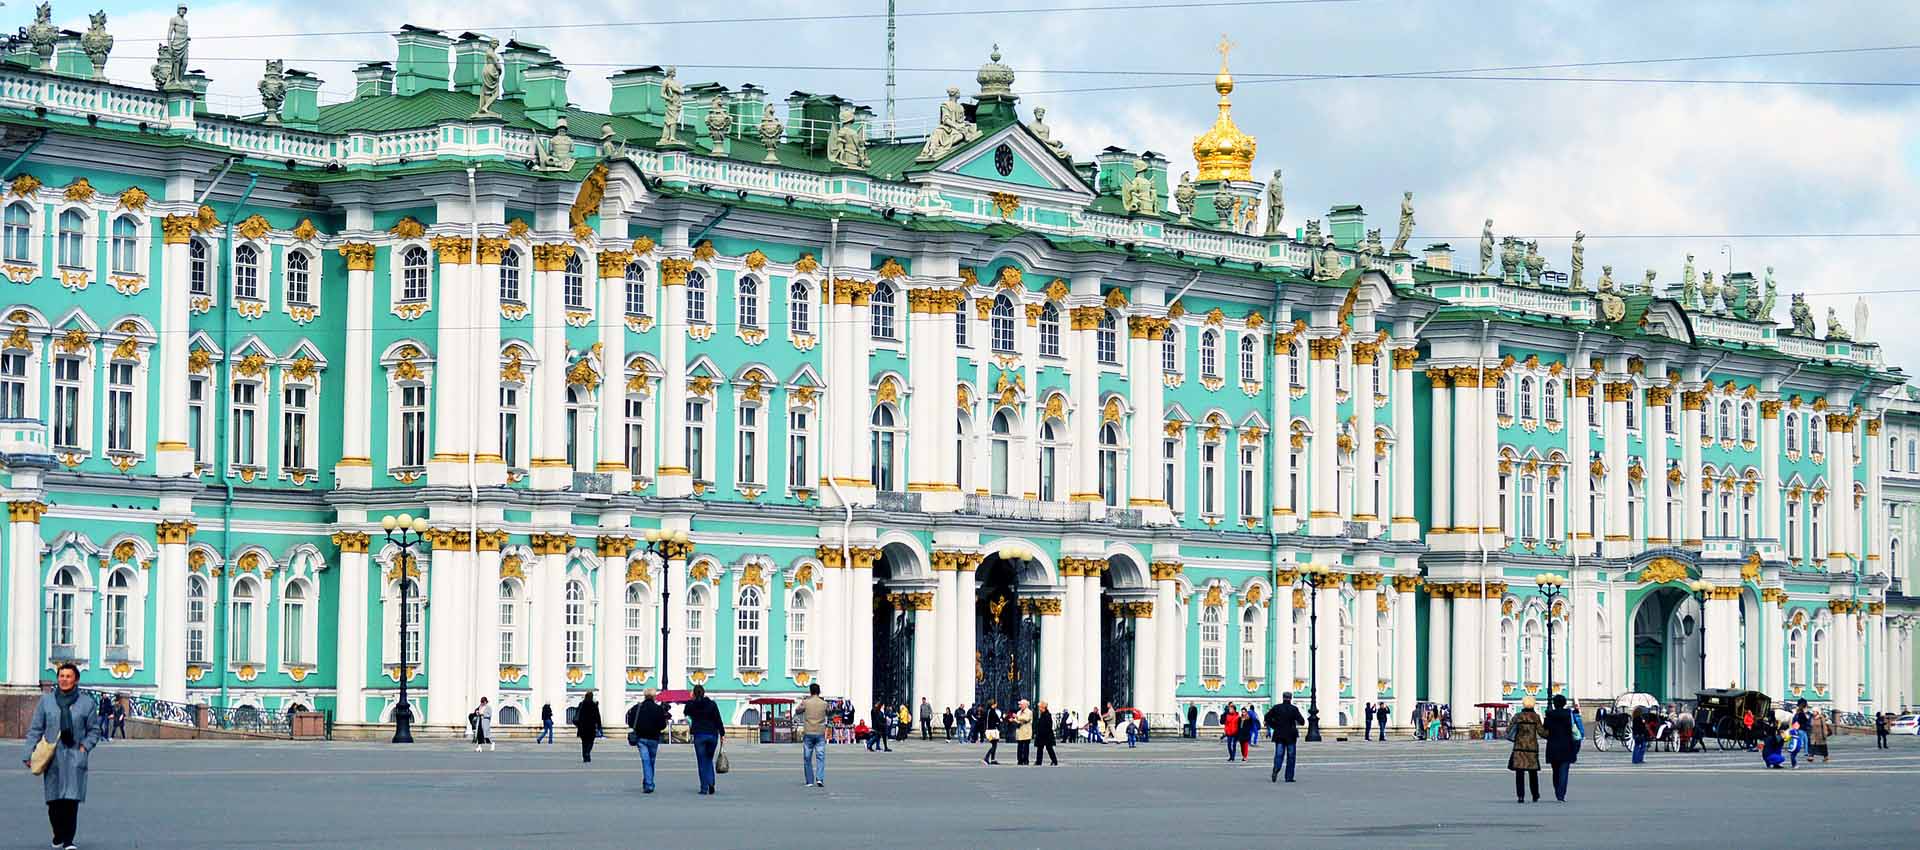 The State Hermitage Museum in Saint Petersburg, Russia